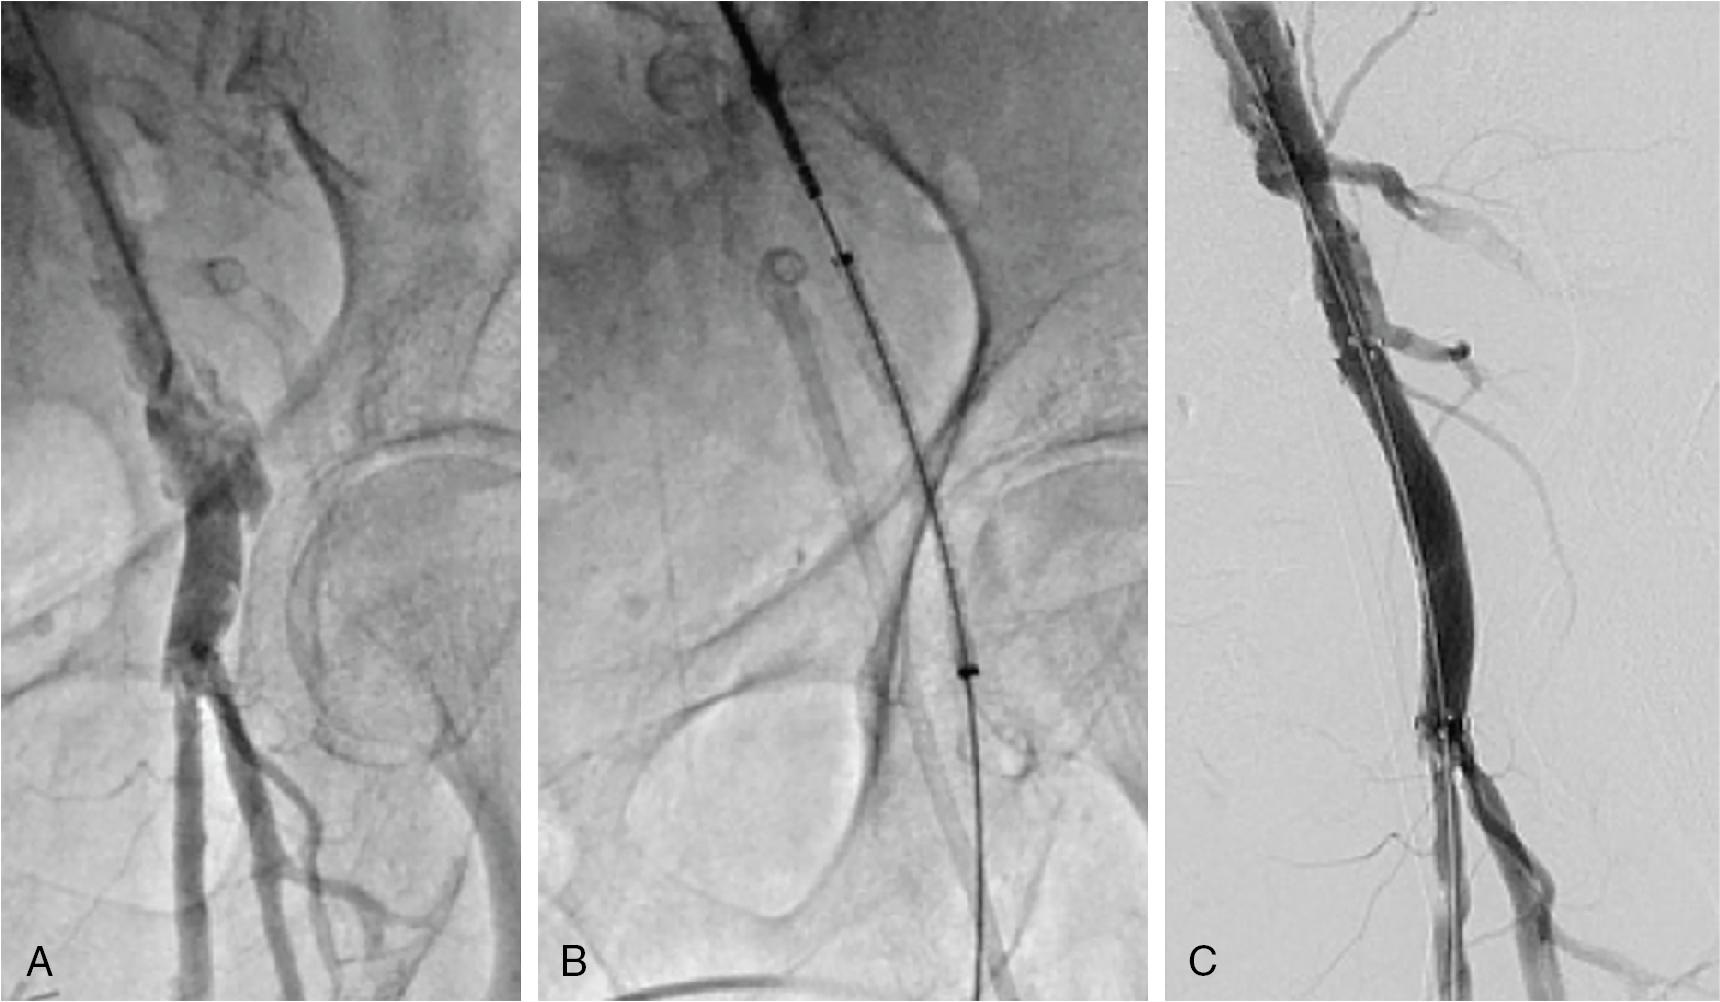 Fig. 13.7, Treatment of Femoral Artery Injury With a Covered Stent.